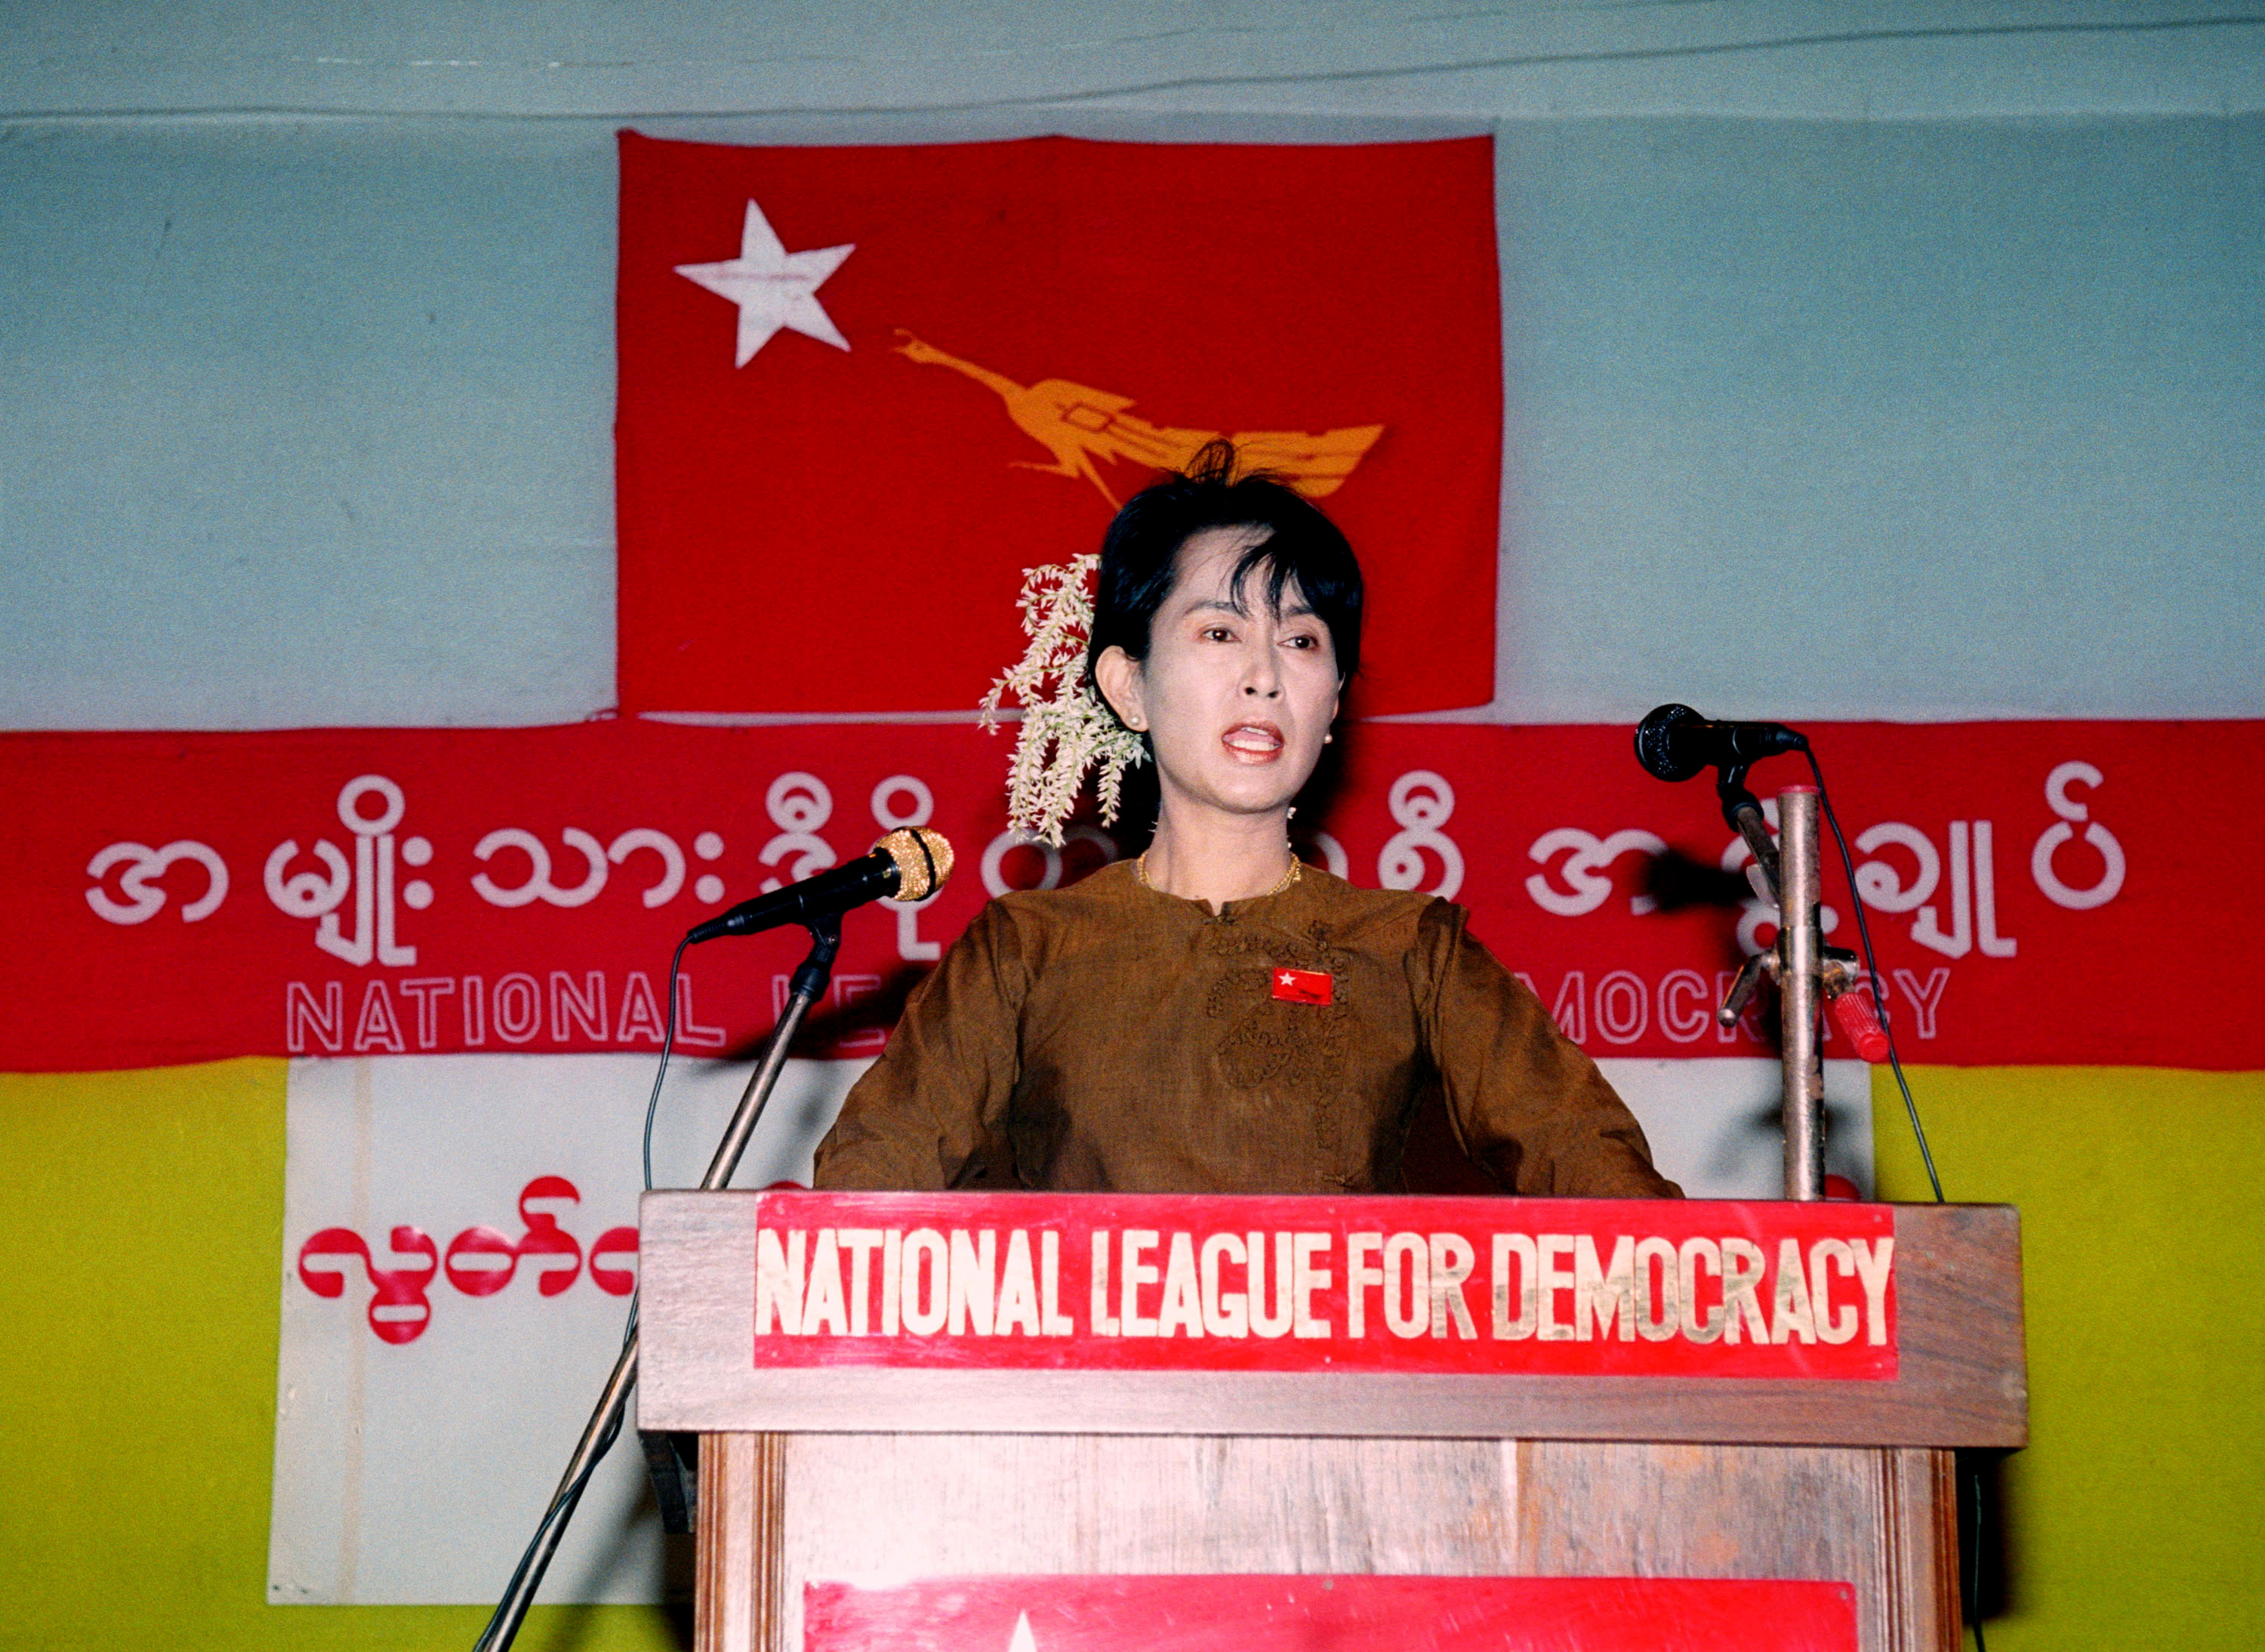 Burmese opposition leader Aung San Suu Kyi makes a speech during the country's 49th Independence Day celebrations in a thatch-roofed meeting hall in the compound of her house in Rangoon on January 4, 1997. REUTERS/Apichart Weerawong